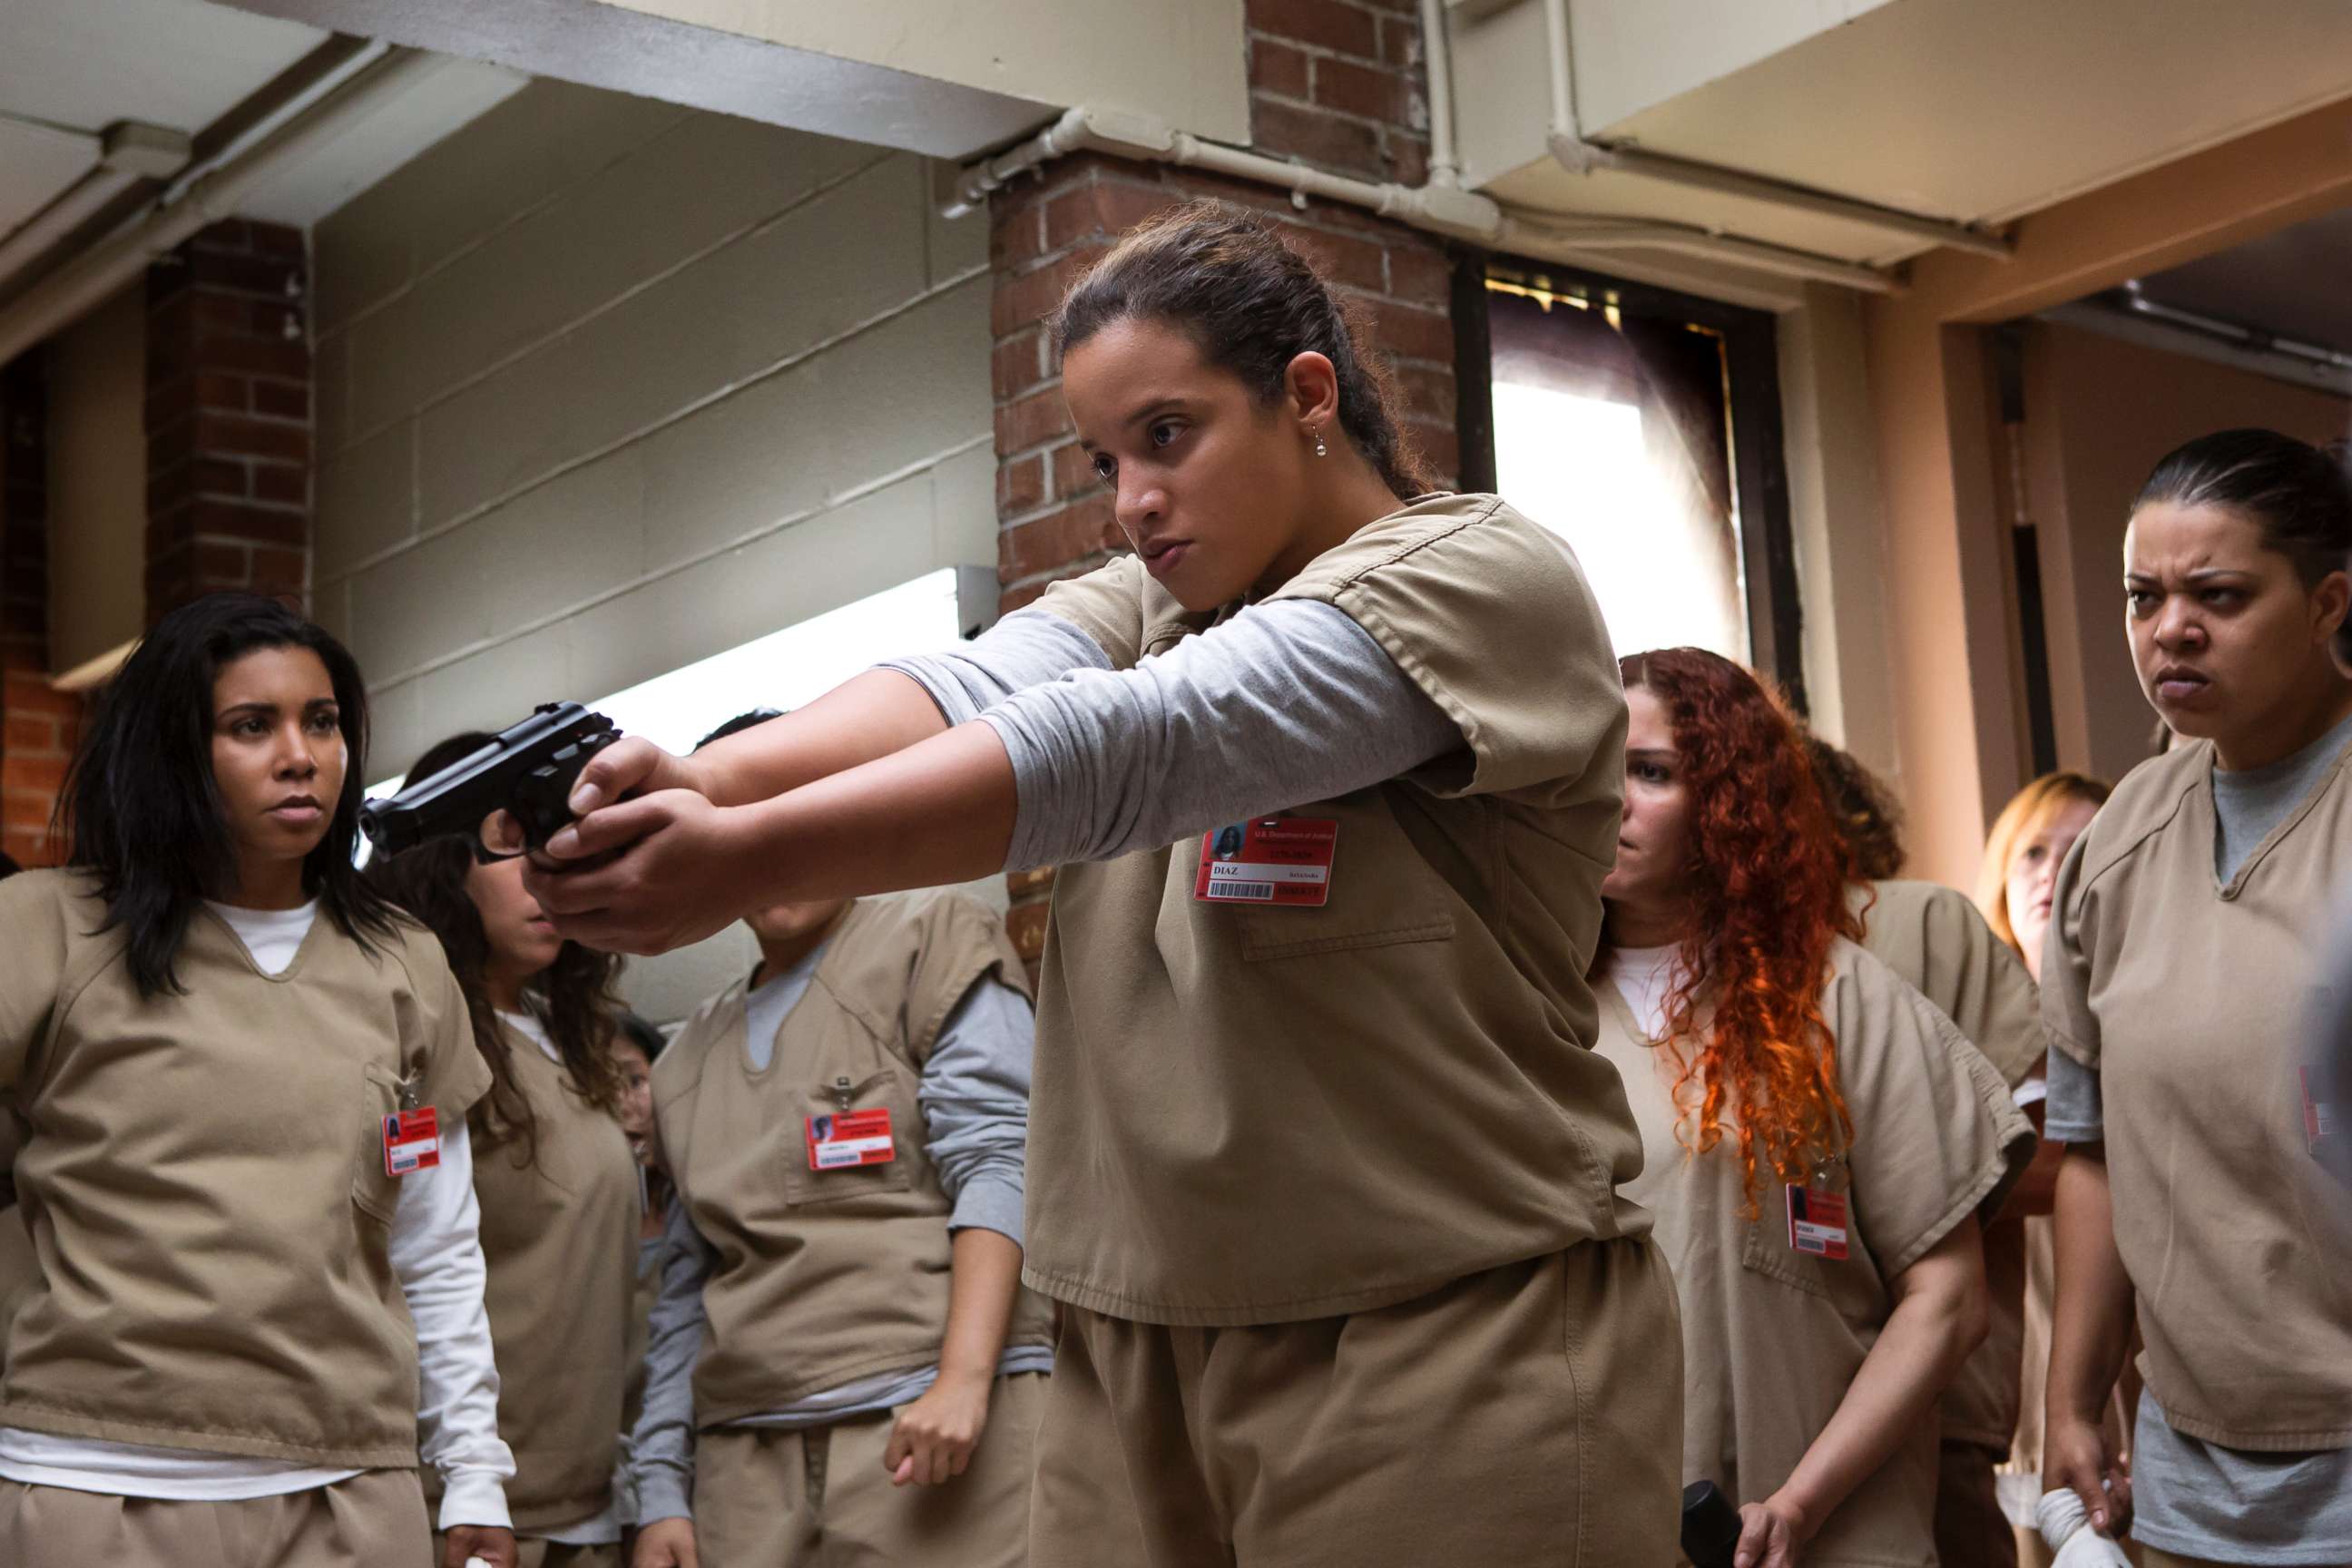 PHOTO: A scene from "Orange is the New Black."